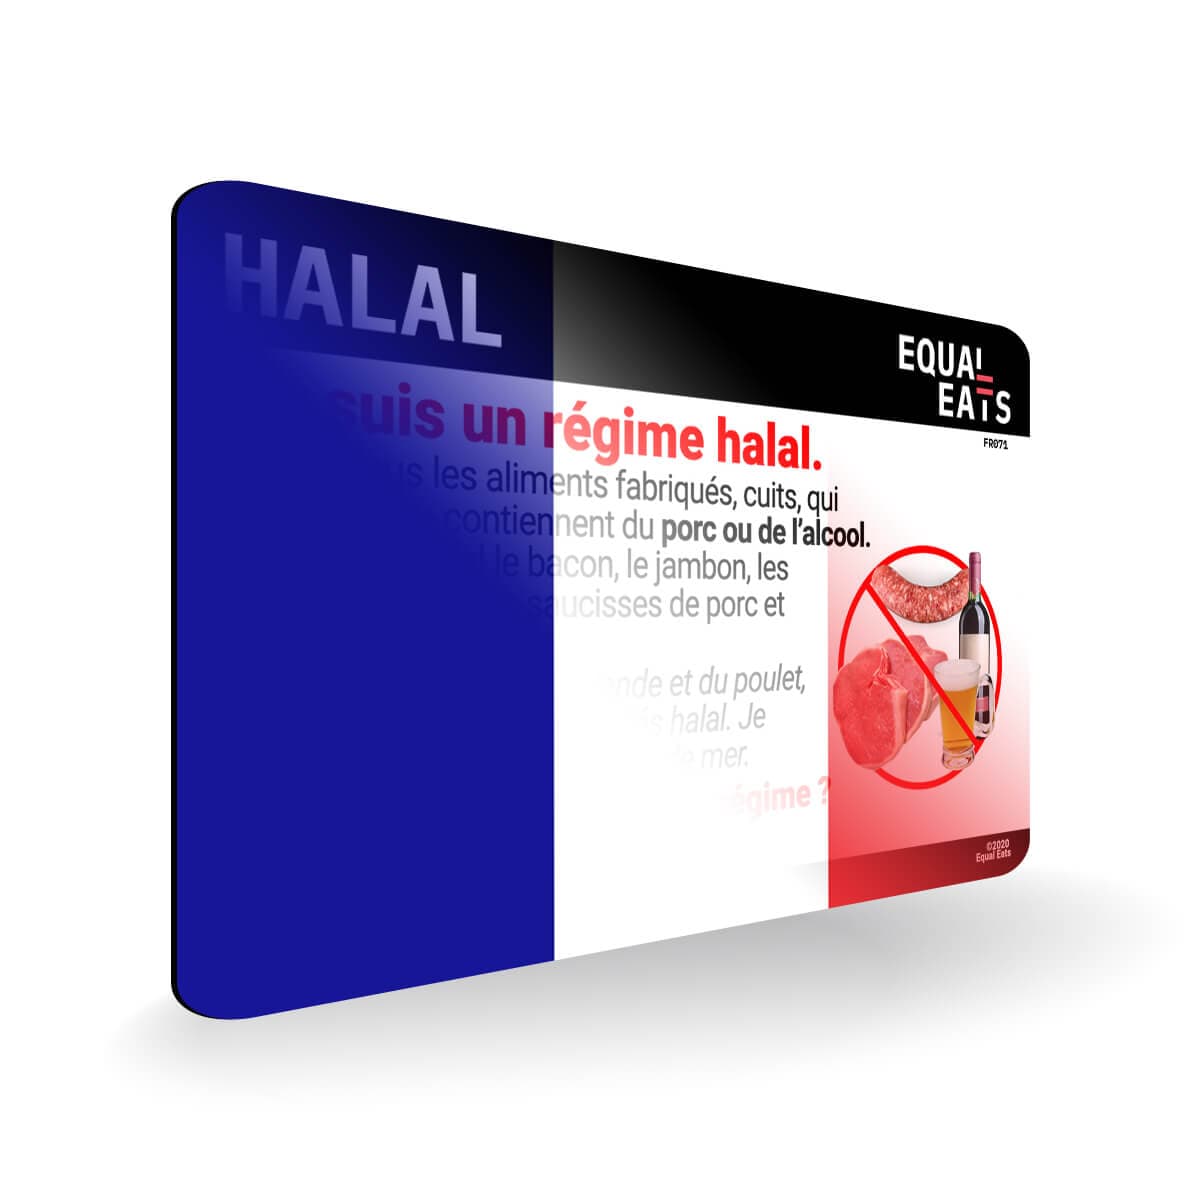 Halal Diet in French. Halal Food Card for France